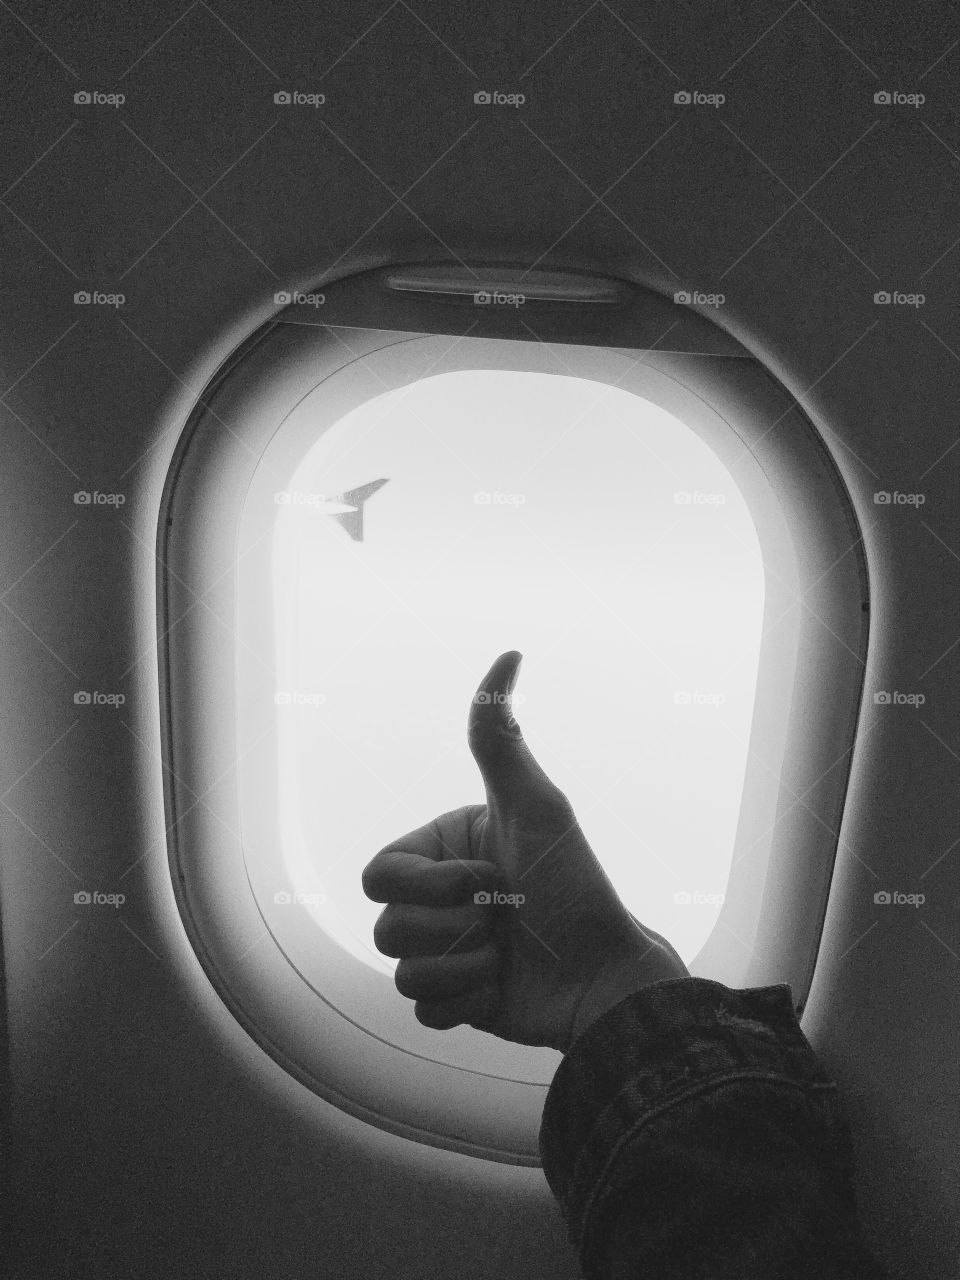 Thumbs up on the plane